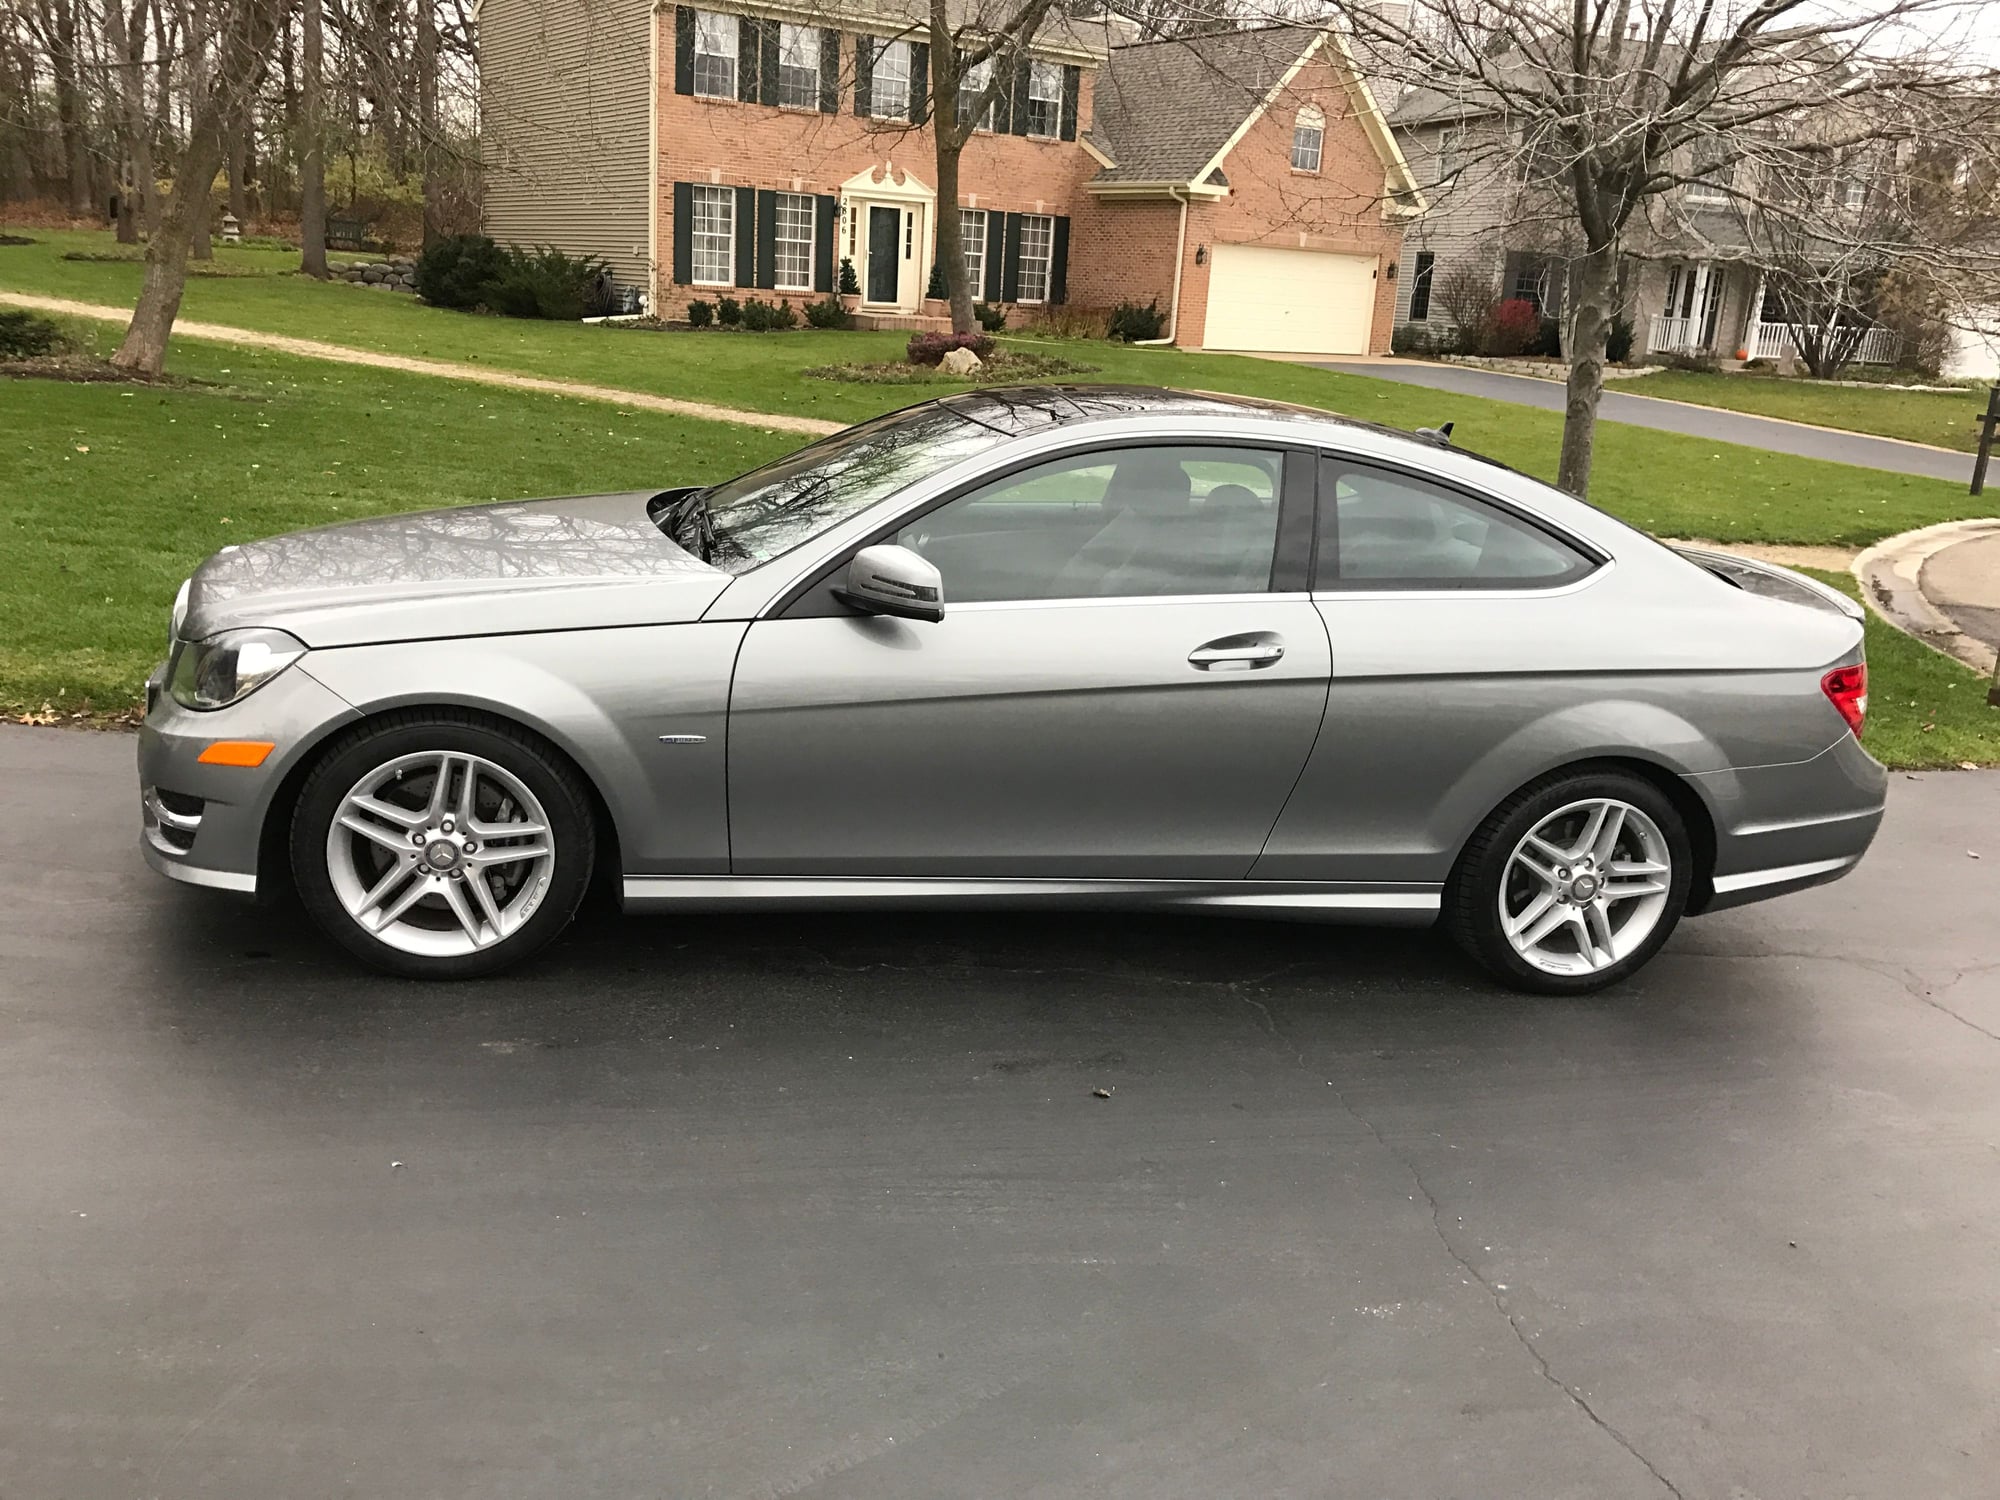 Wheels and Tires/Axles - 17in Mercedes AMG wheels - Used - 2010 to 2014 Mercedes-Benz C350 - 2011 to 2014 Mercedes-Benz C300 - Lindehurst, IL 60046, United States